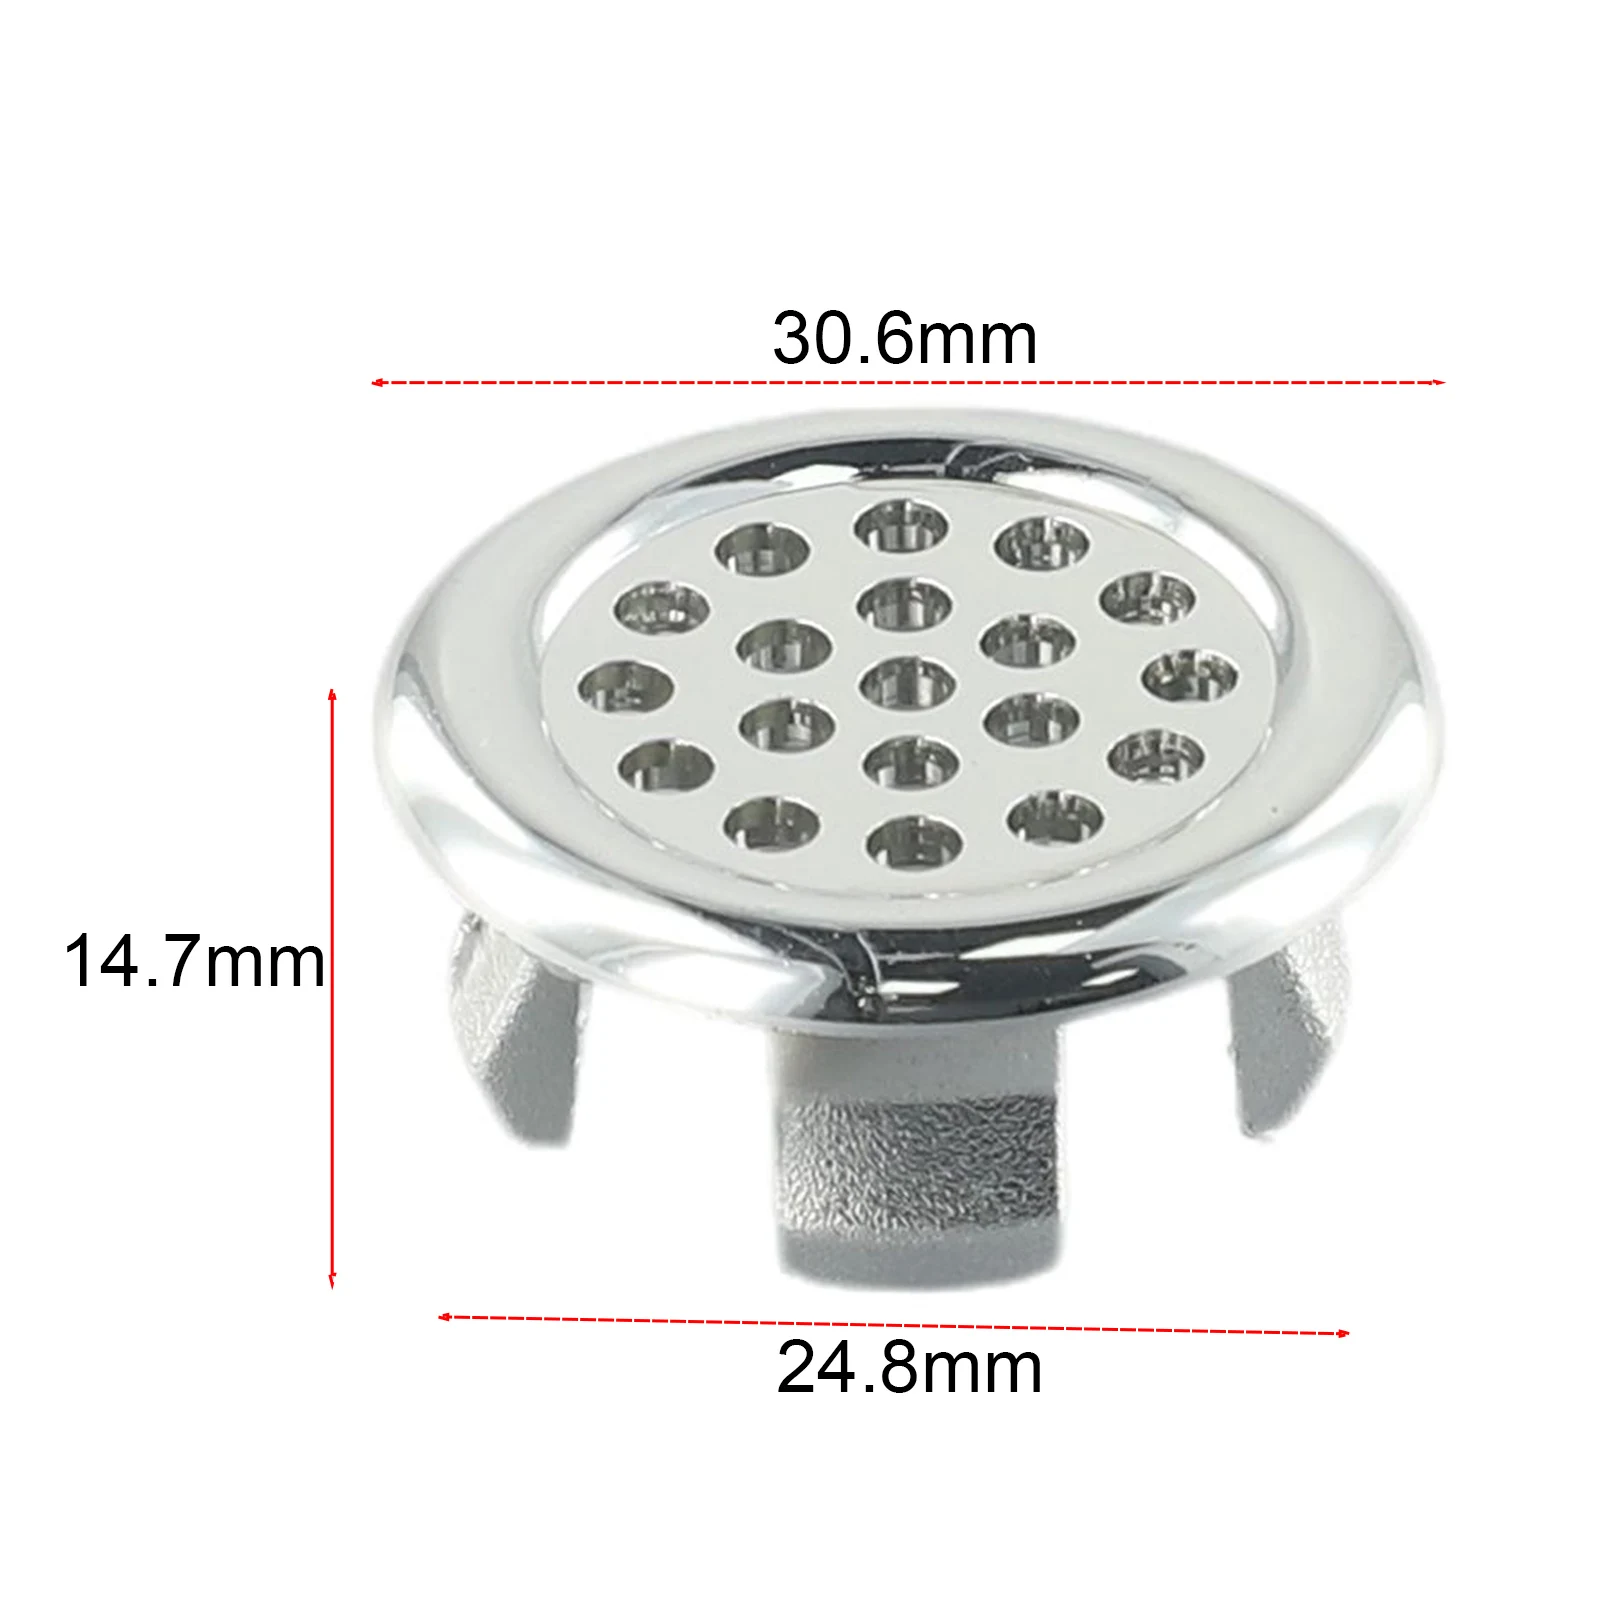 

Overflow Ring Bathroom Overflow Covers For Basin/Sink Chromed Replacement Hole Kitchen Drain Cap Cover For Bathroom